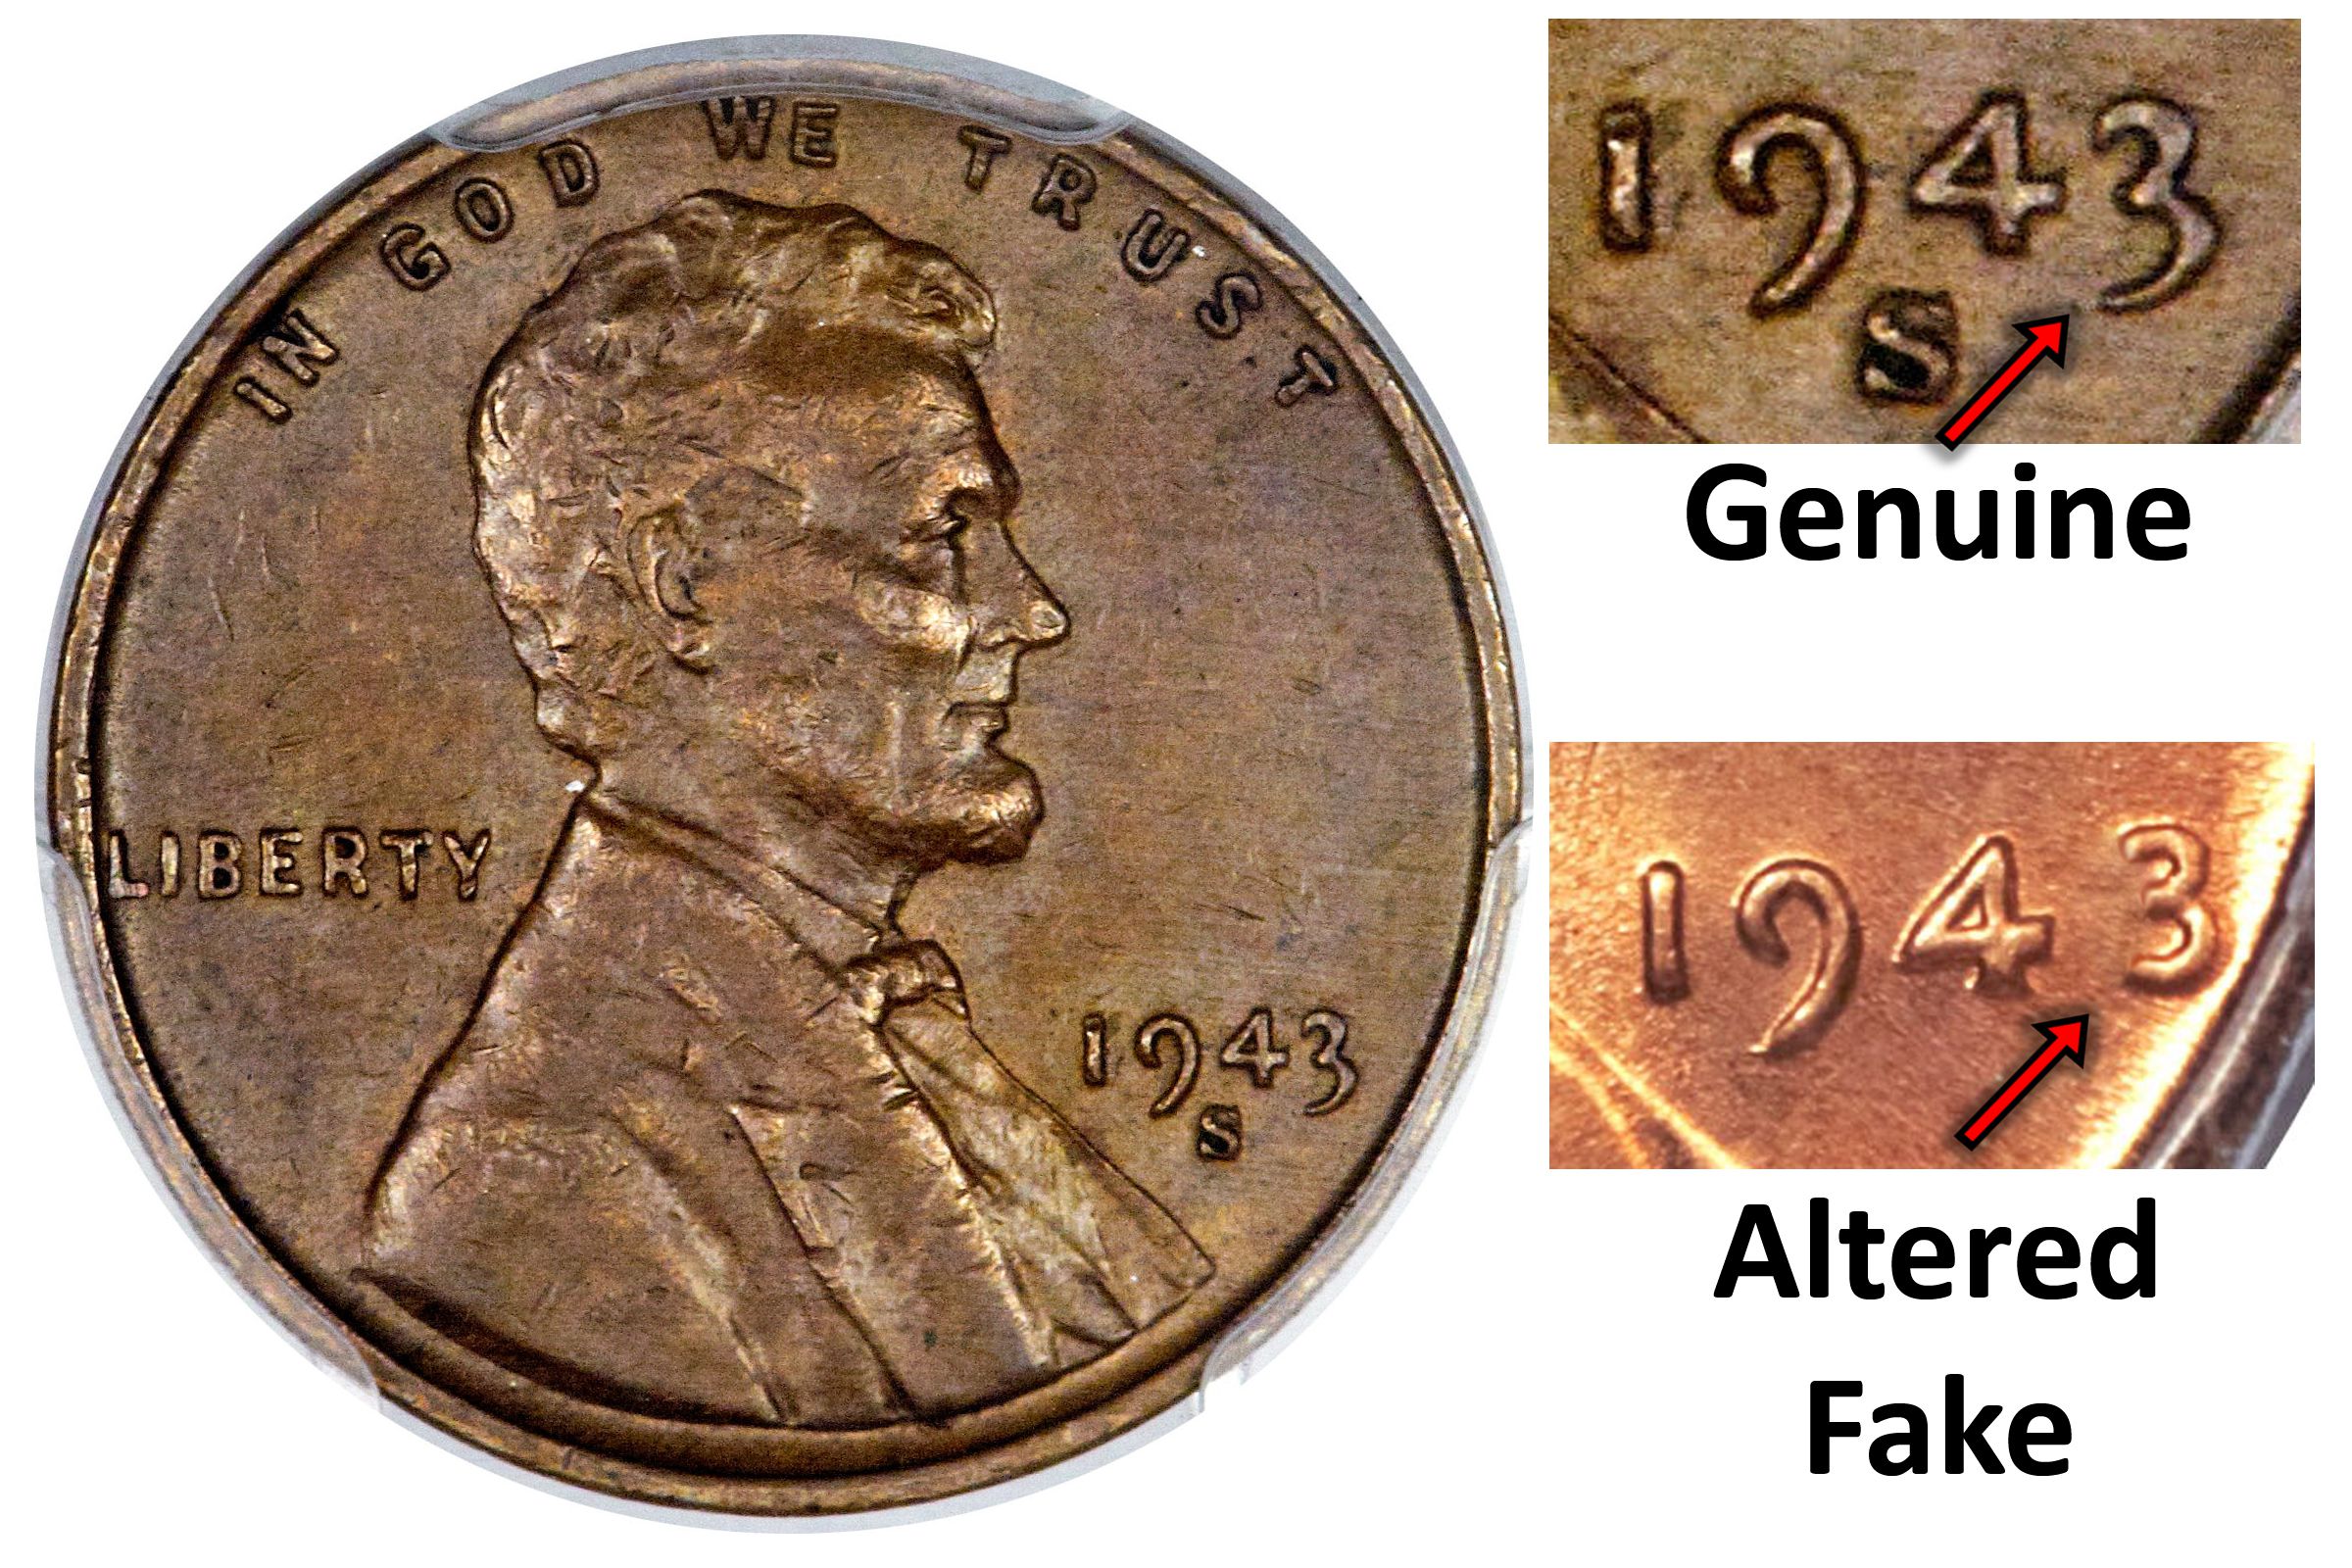 1943 Copper Penny Spotting a Fake